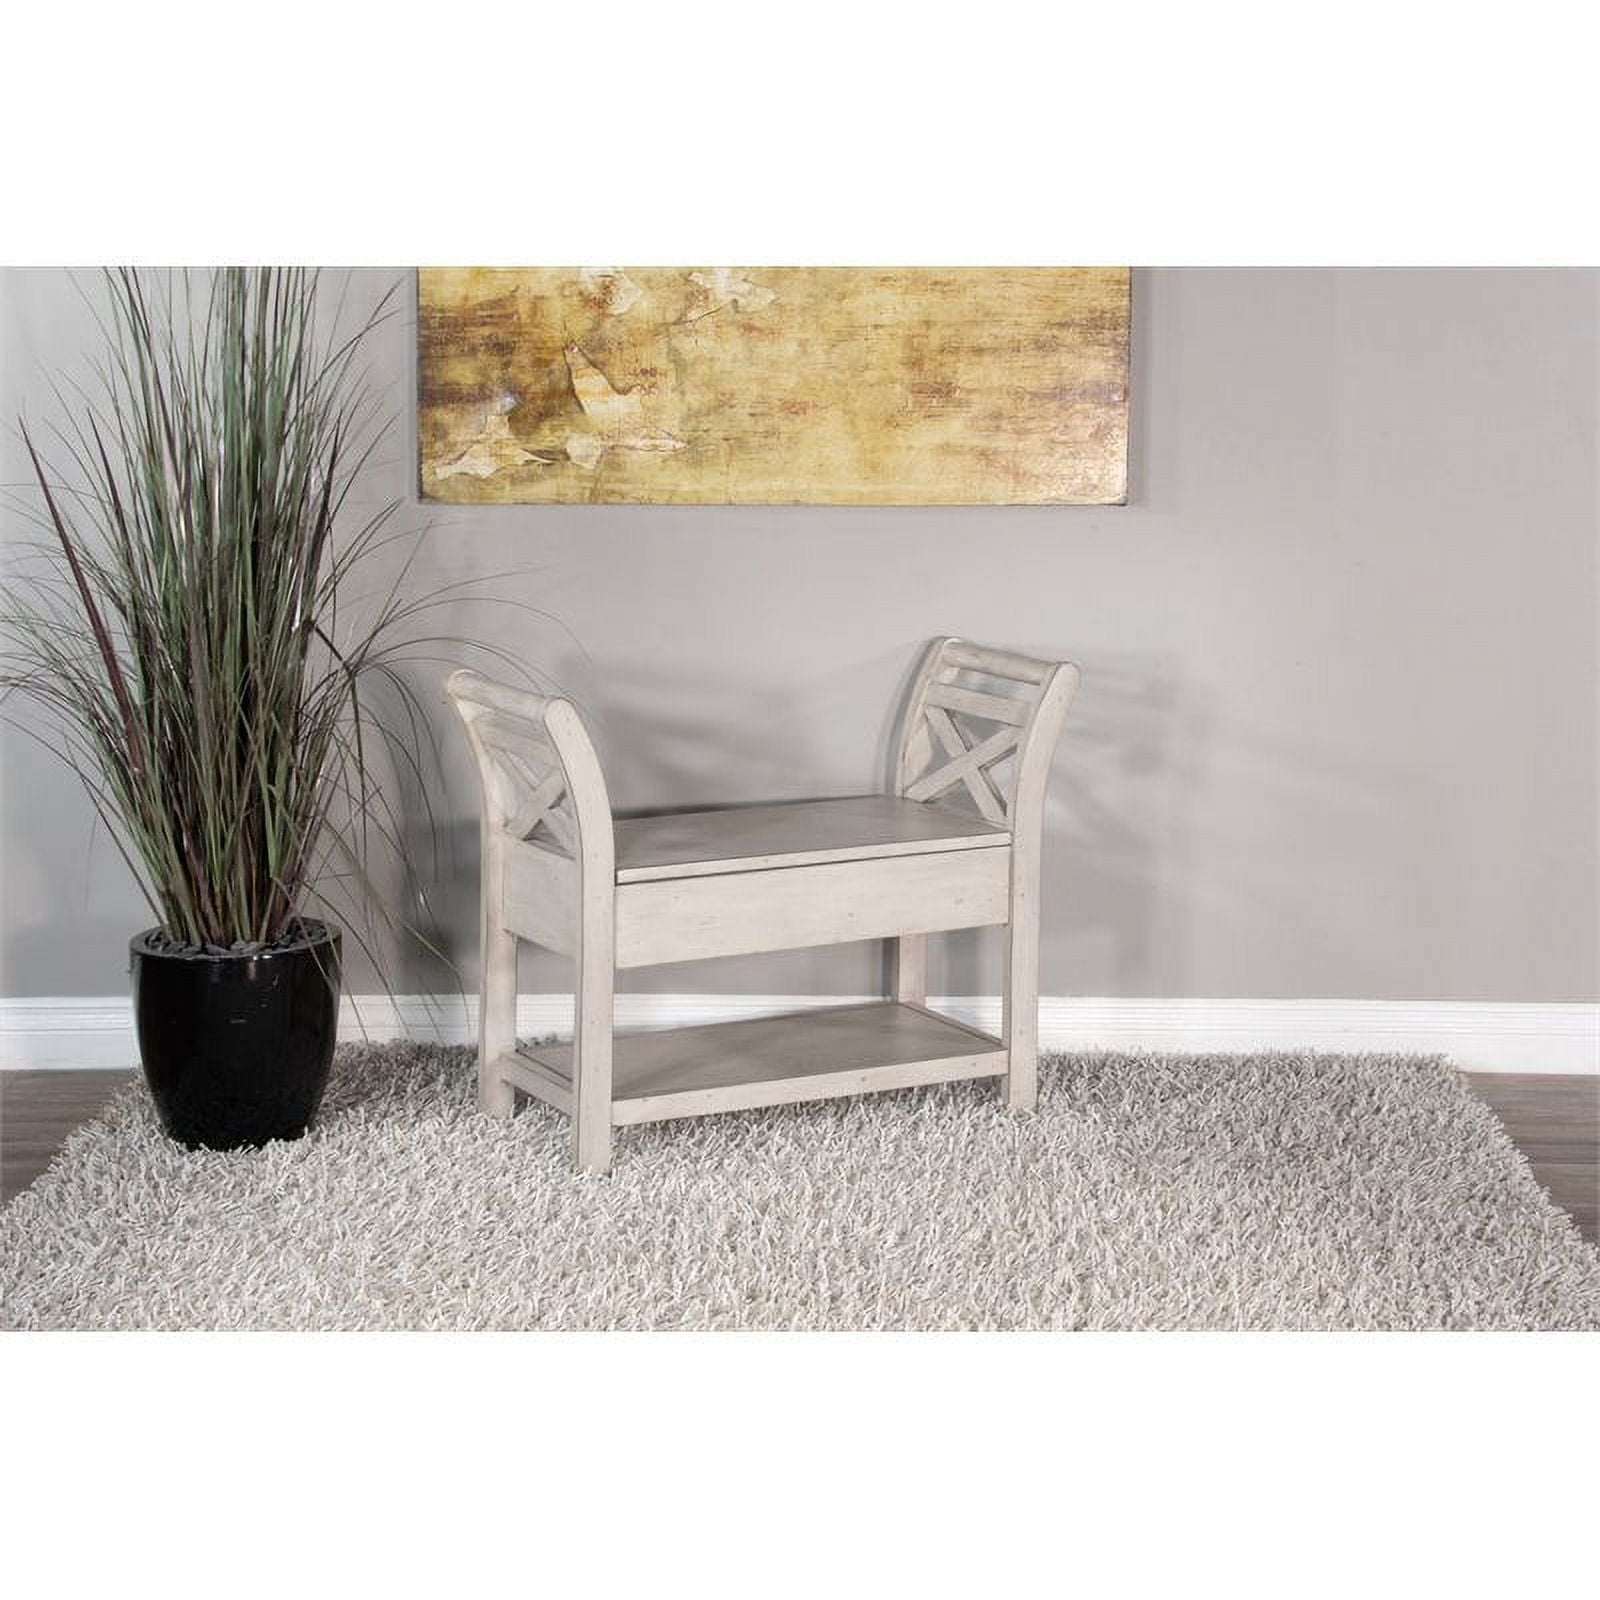 Sunny Designs 28 Farmhouse Wood Accent Bench with Storage in Marble White